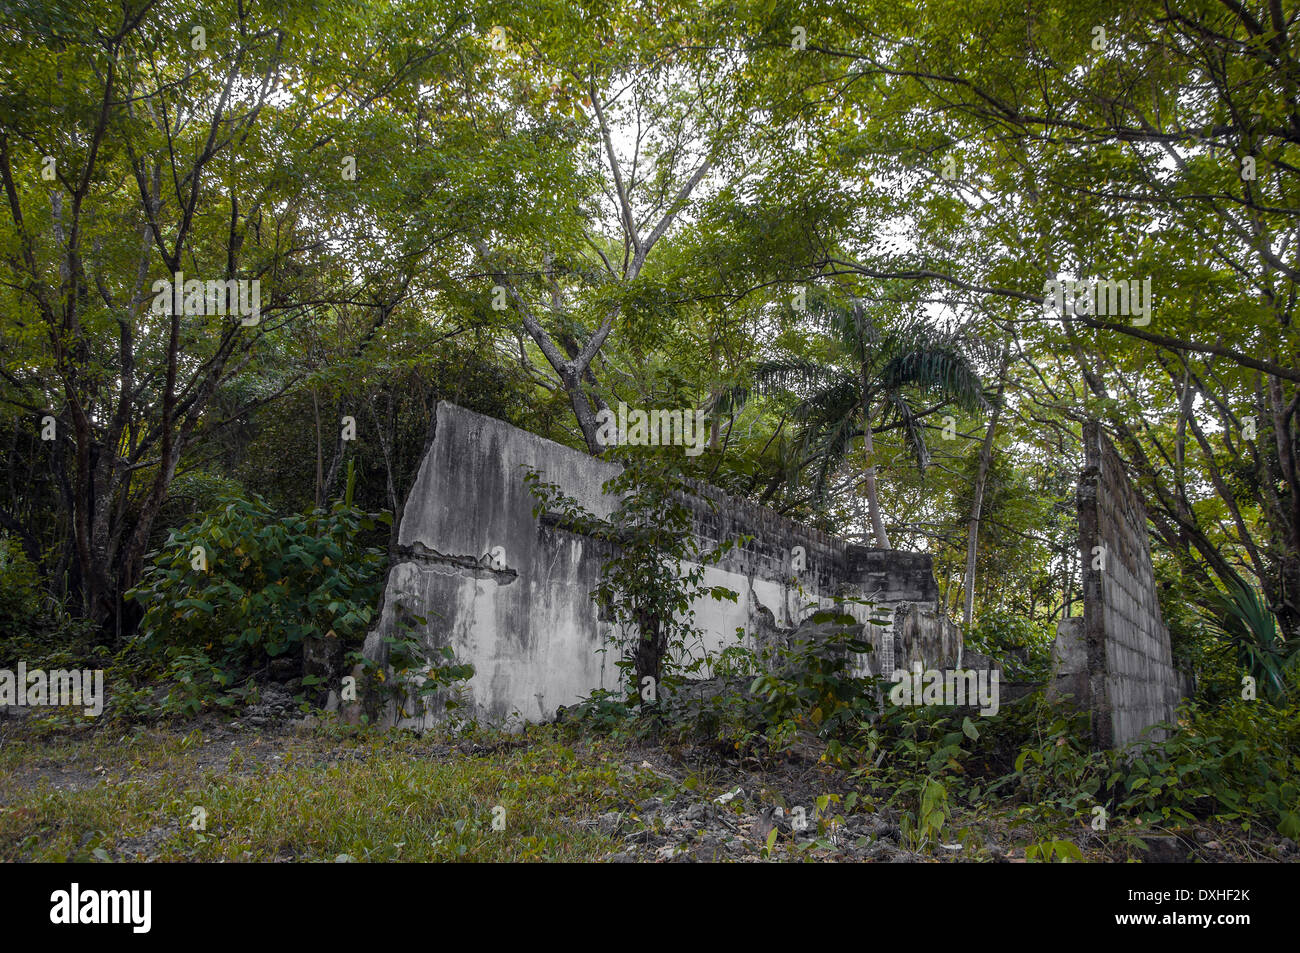 The jungle overtaking a ruined building. Stock Photo